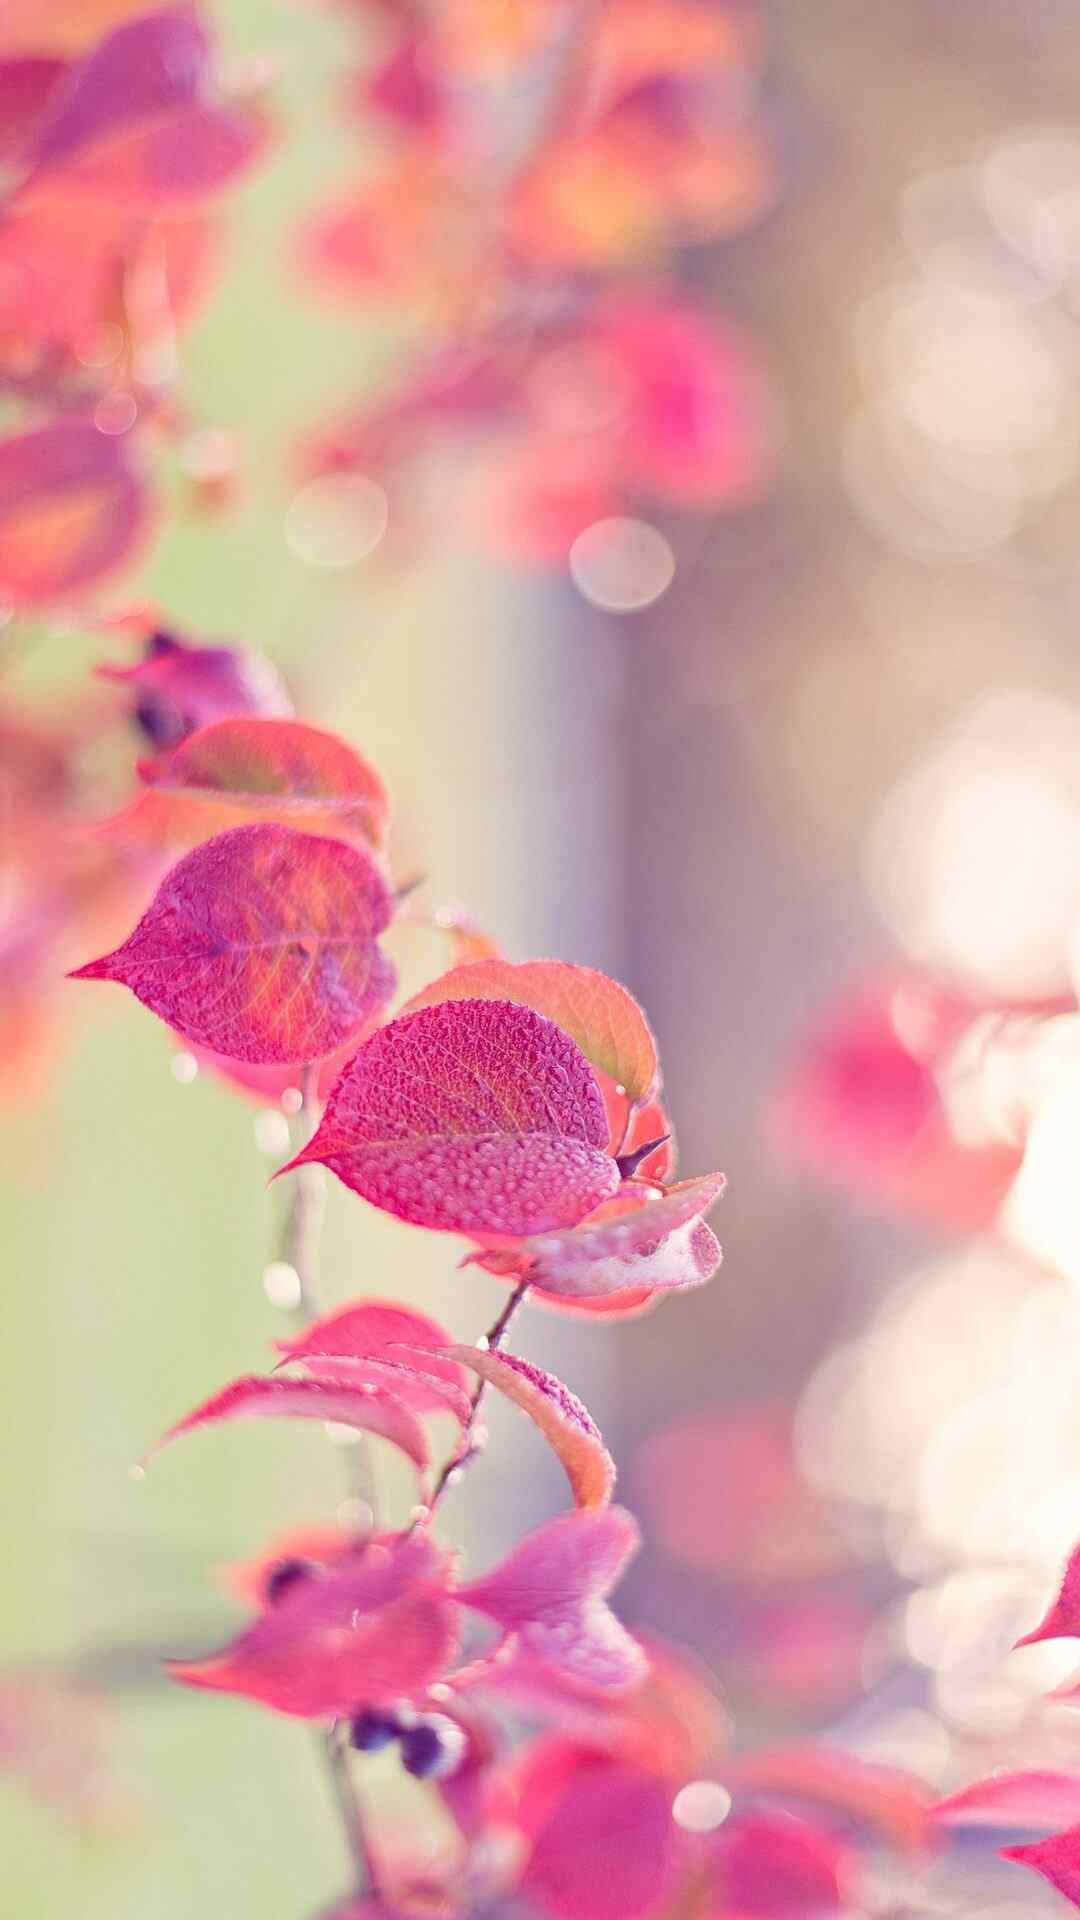 Free Pretty Phone Wallpaper Downloads, [100+] Pretty Phone Wallpapers for  FREE 